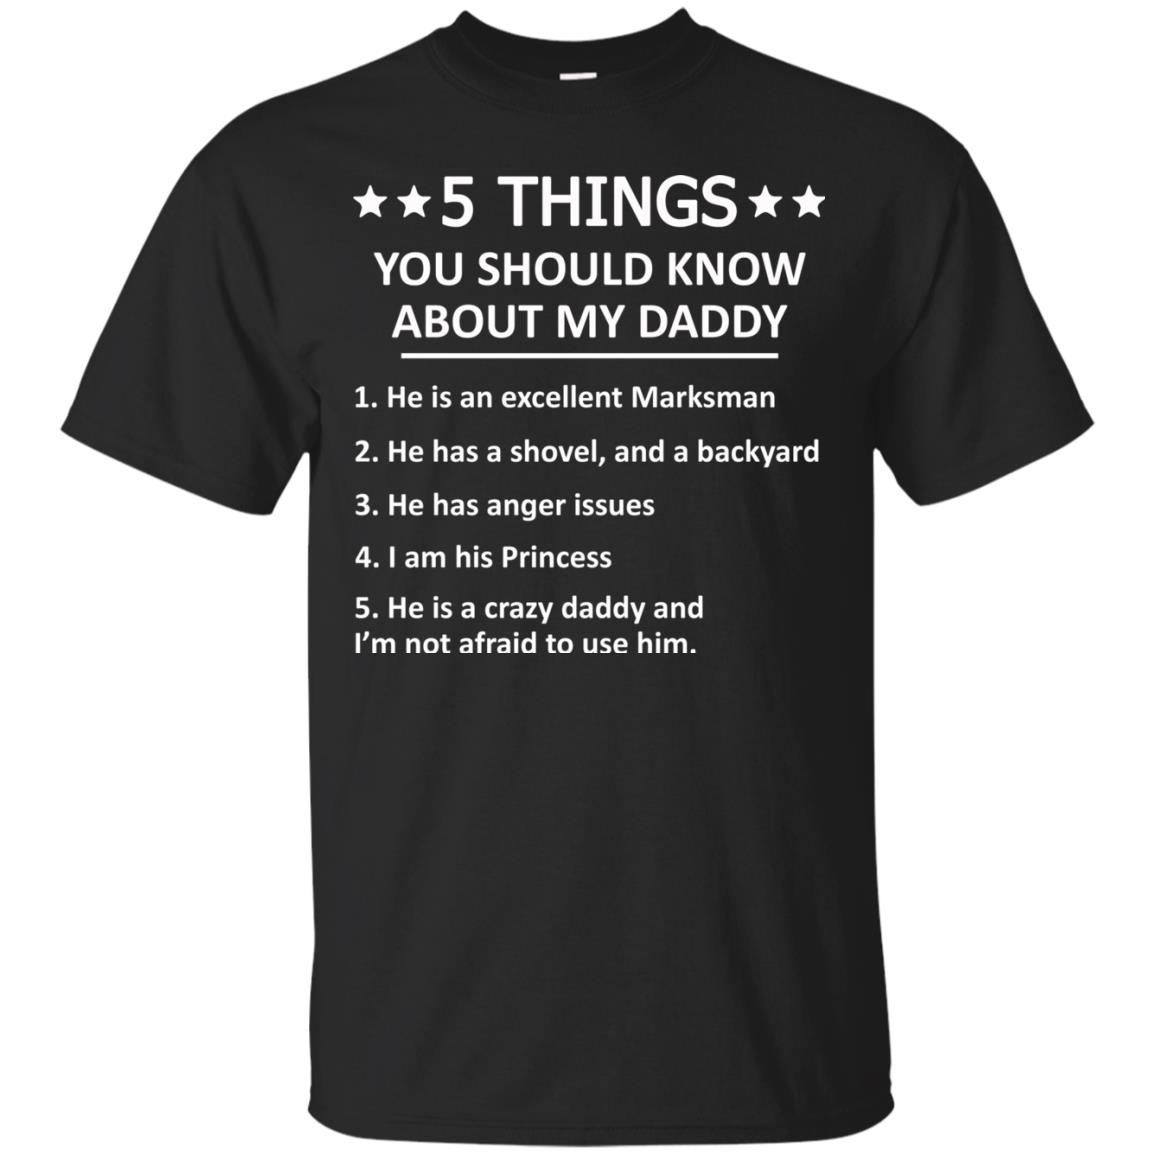 5 Things you should know about my daddy t shirt, hoodies, tank